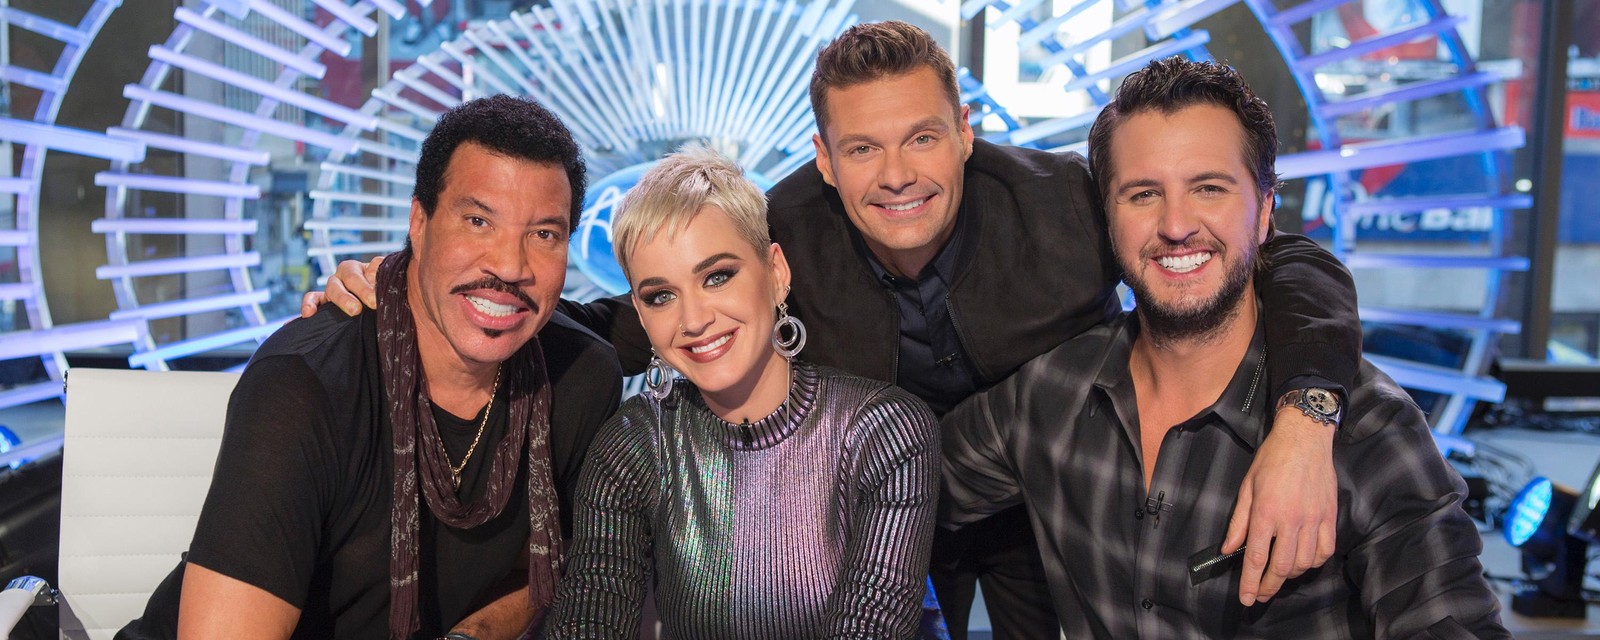 When Does American Idol Start? 2018 Premiere Date Announced! American